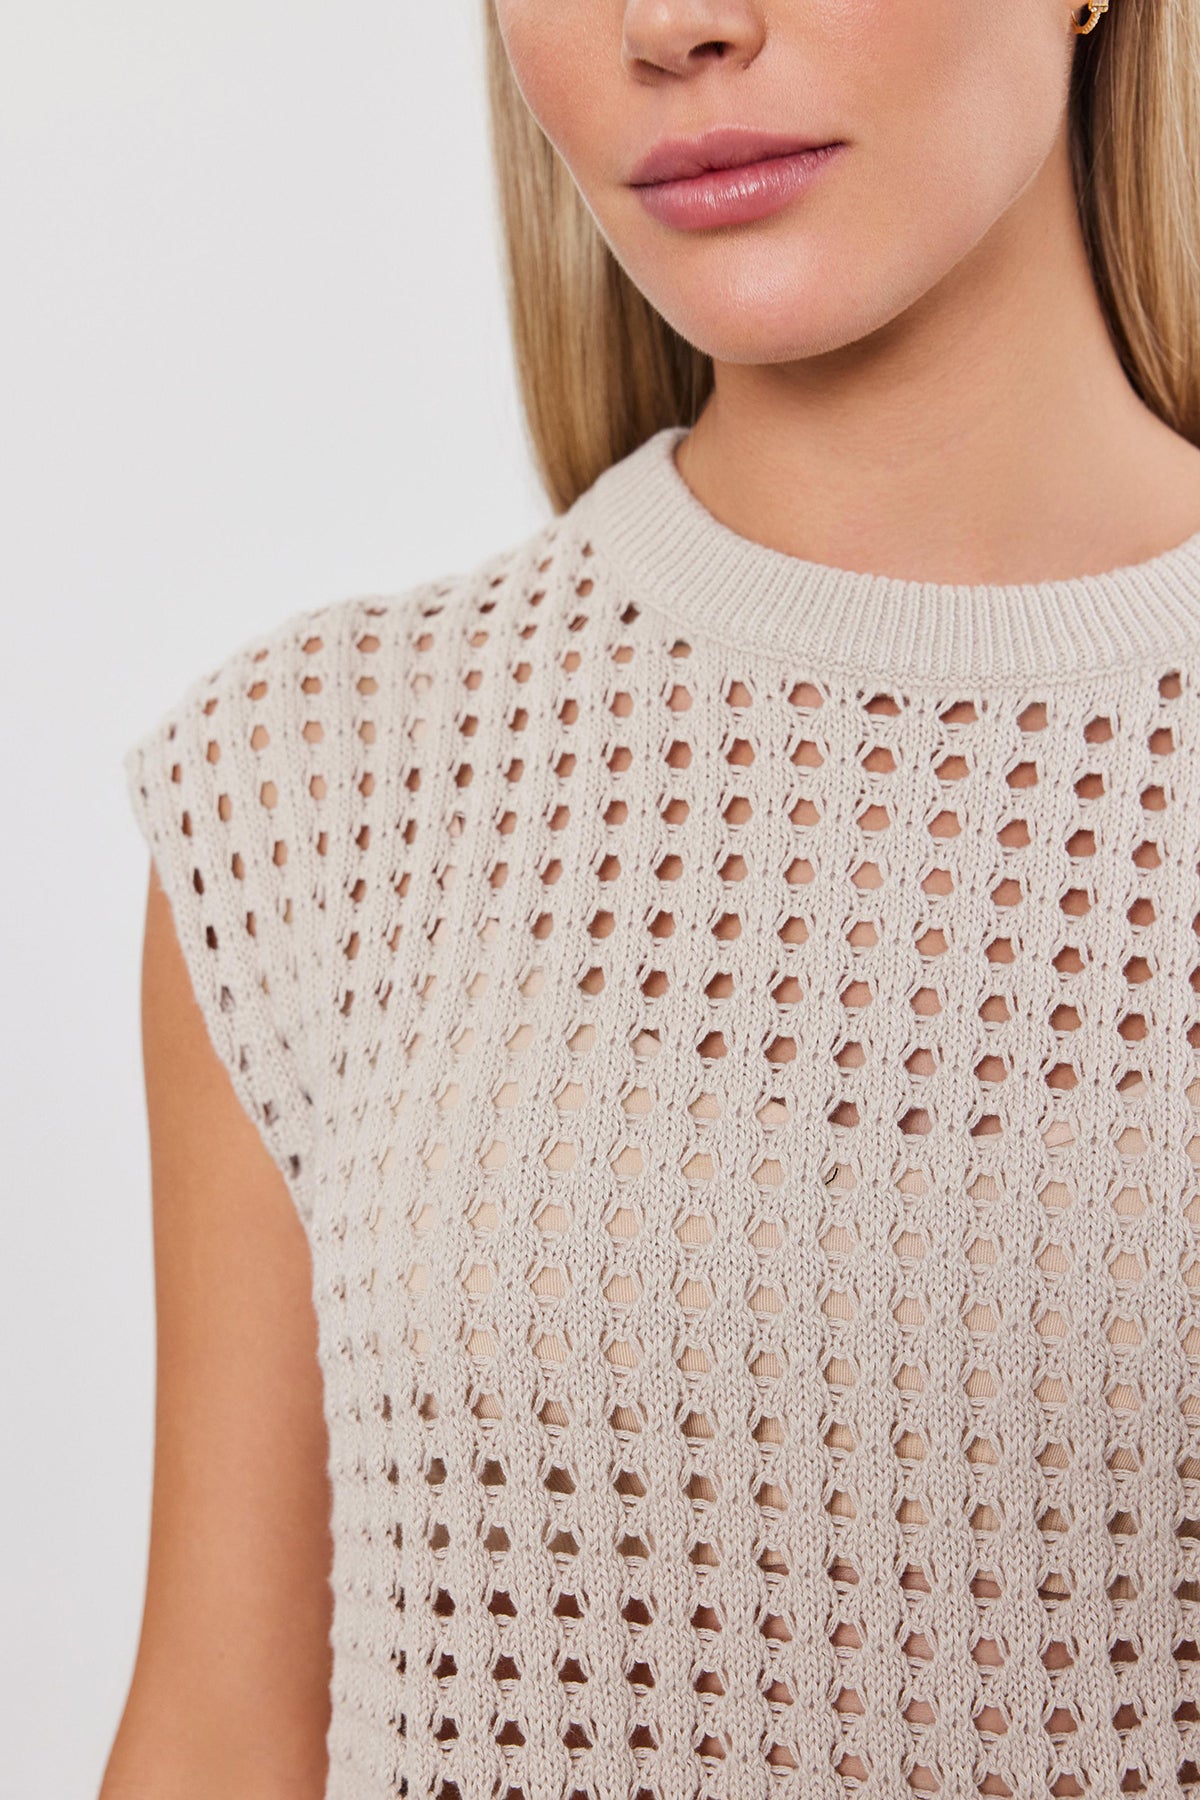 Close-up of a woman wearing a beige cotton cashmere sleeveless MAISON SWEATER, focusing on the intricate pattern of the knitwear by Velvet by Graham & Spencer.-36943960178881